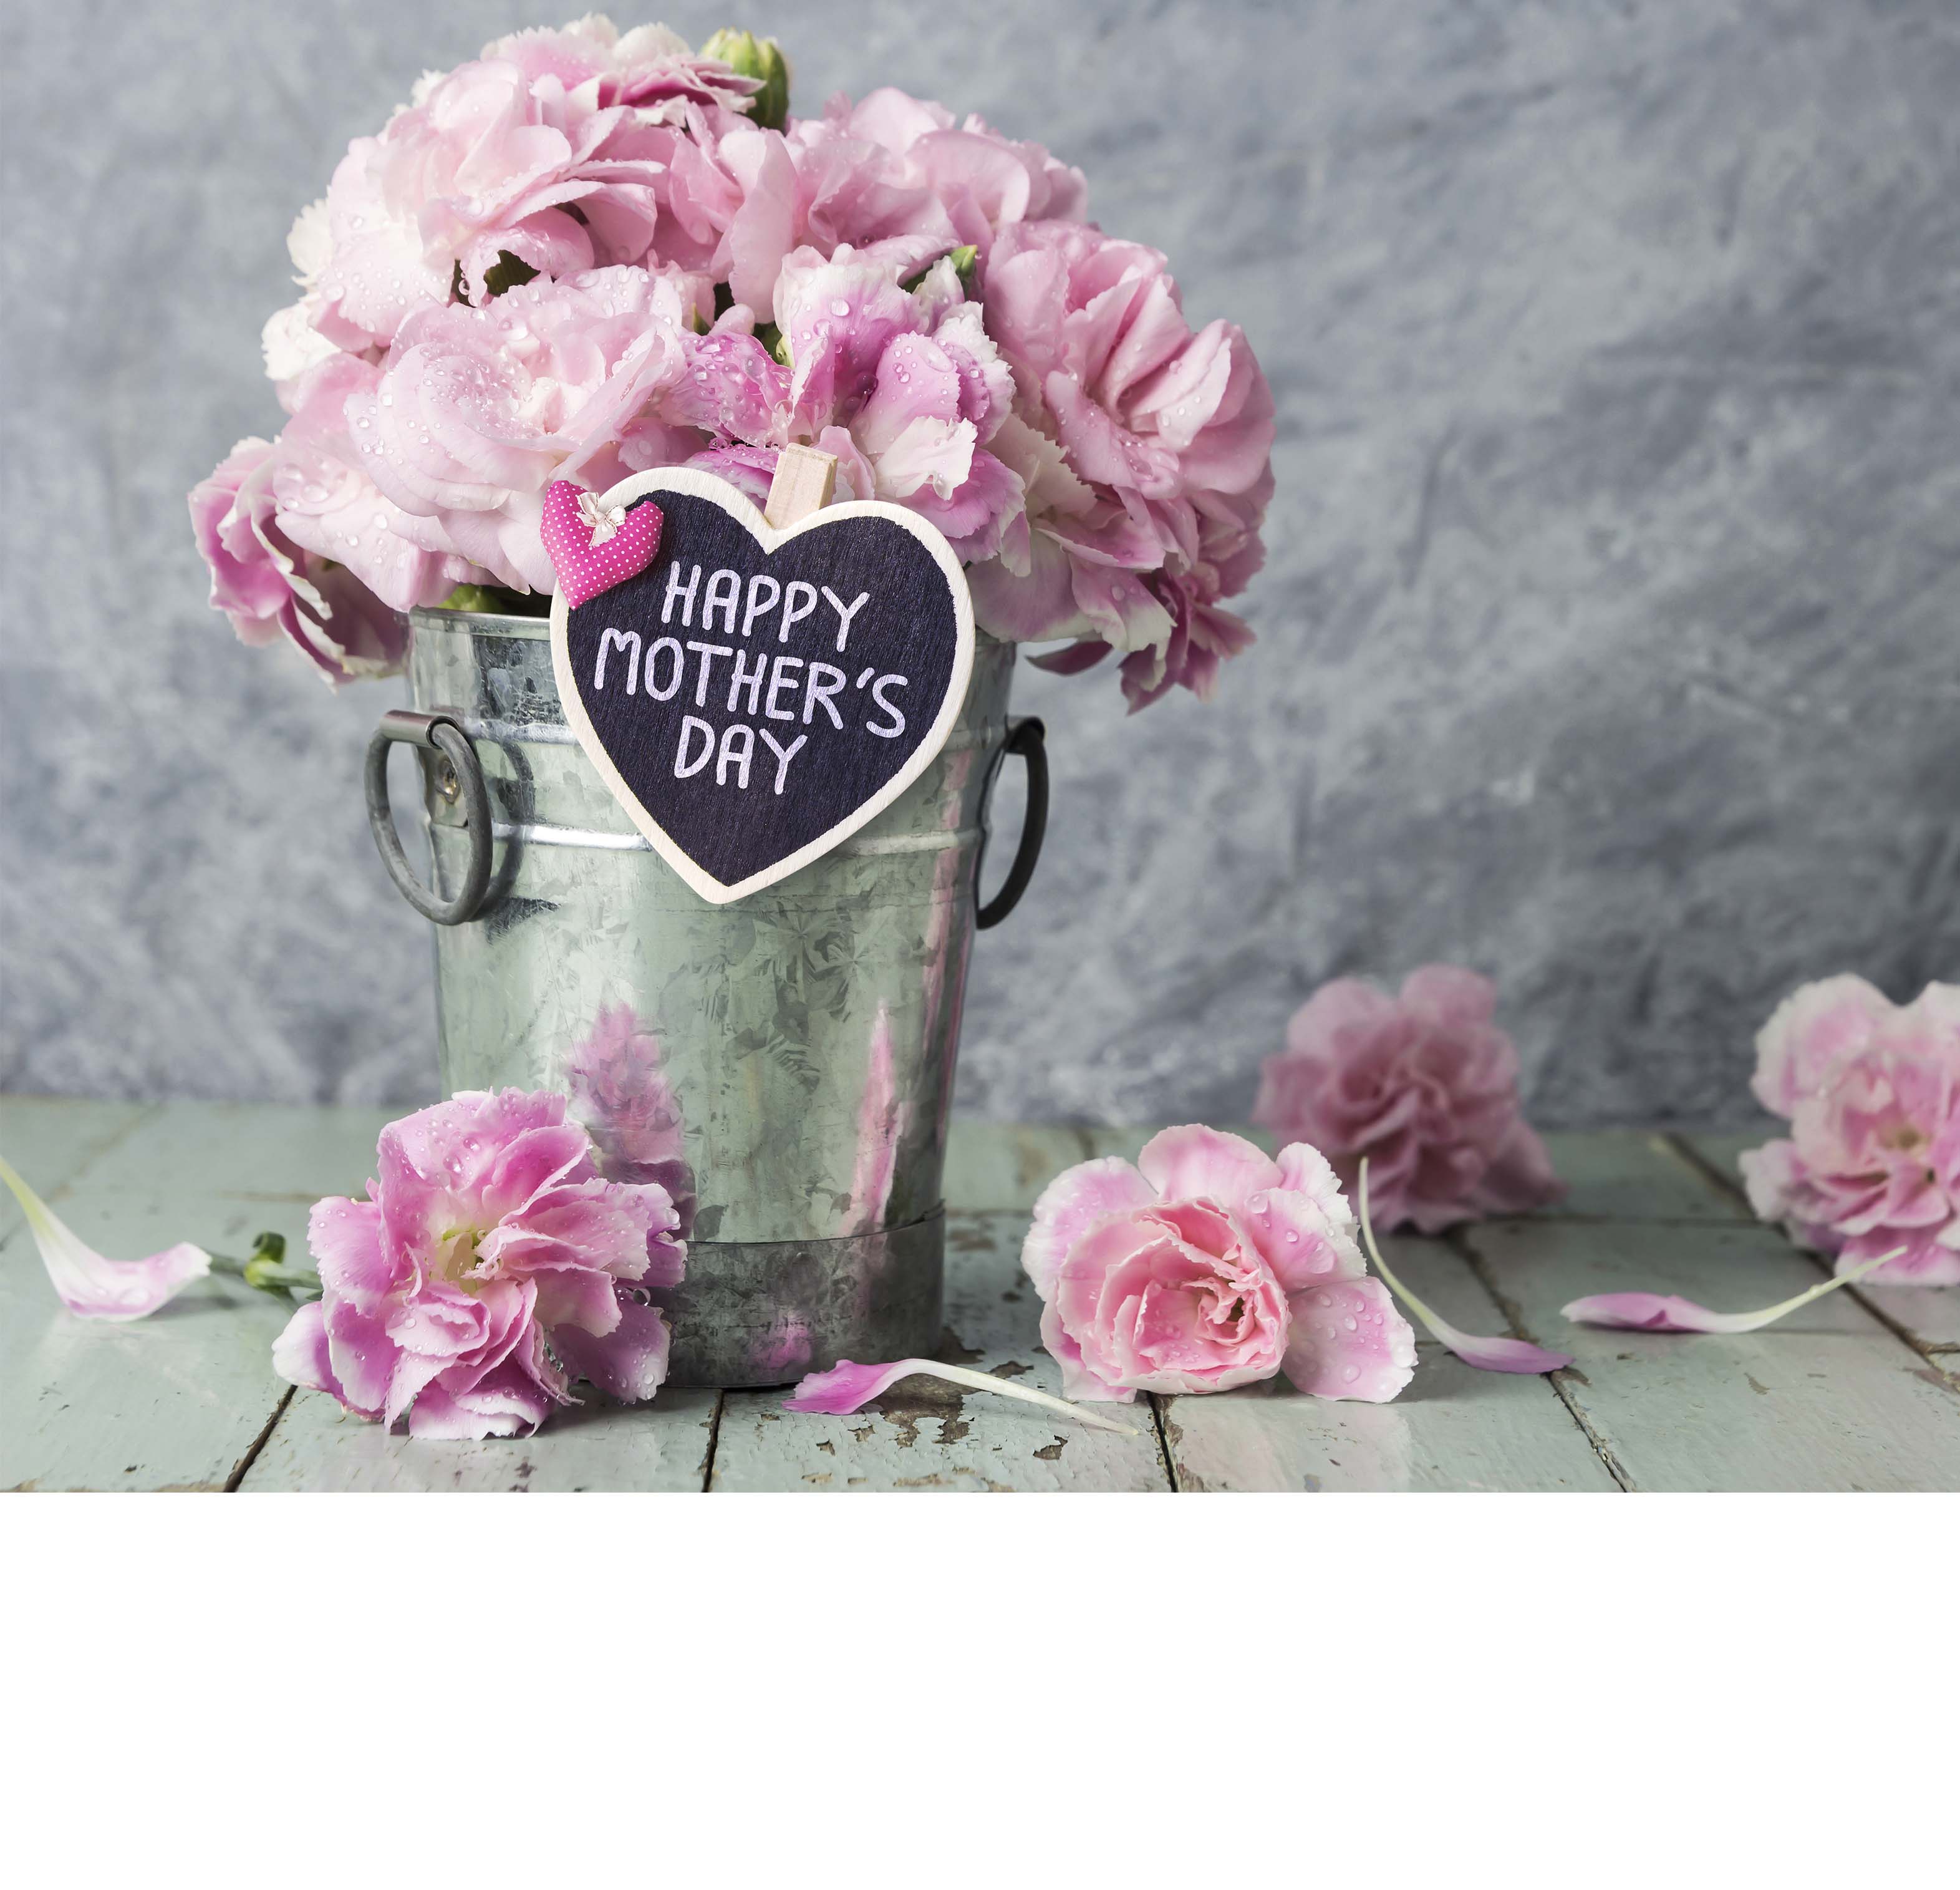 5 Flowers to Give for Mother's Day